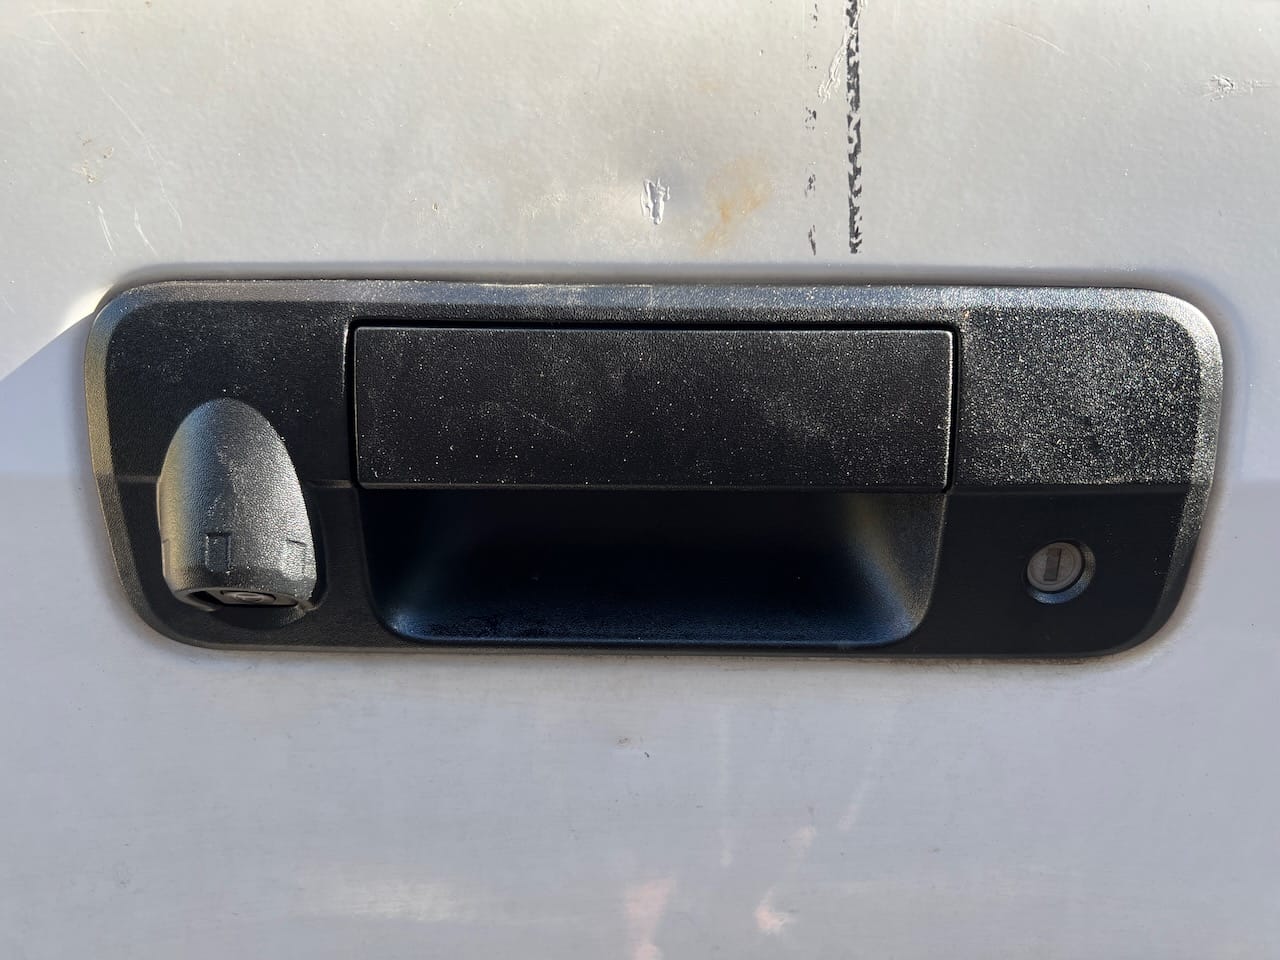 New tailgate handle assembly installed on a 2008 Toyota Tundra.